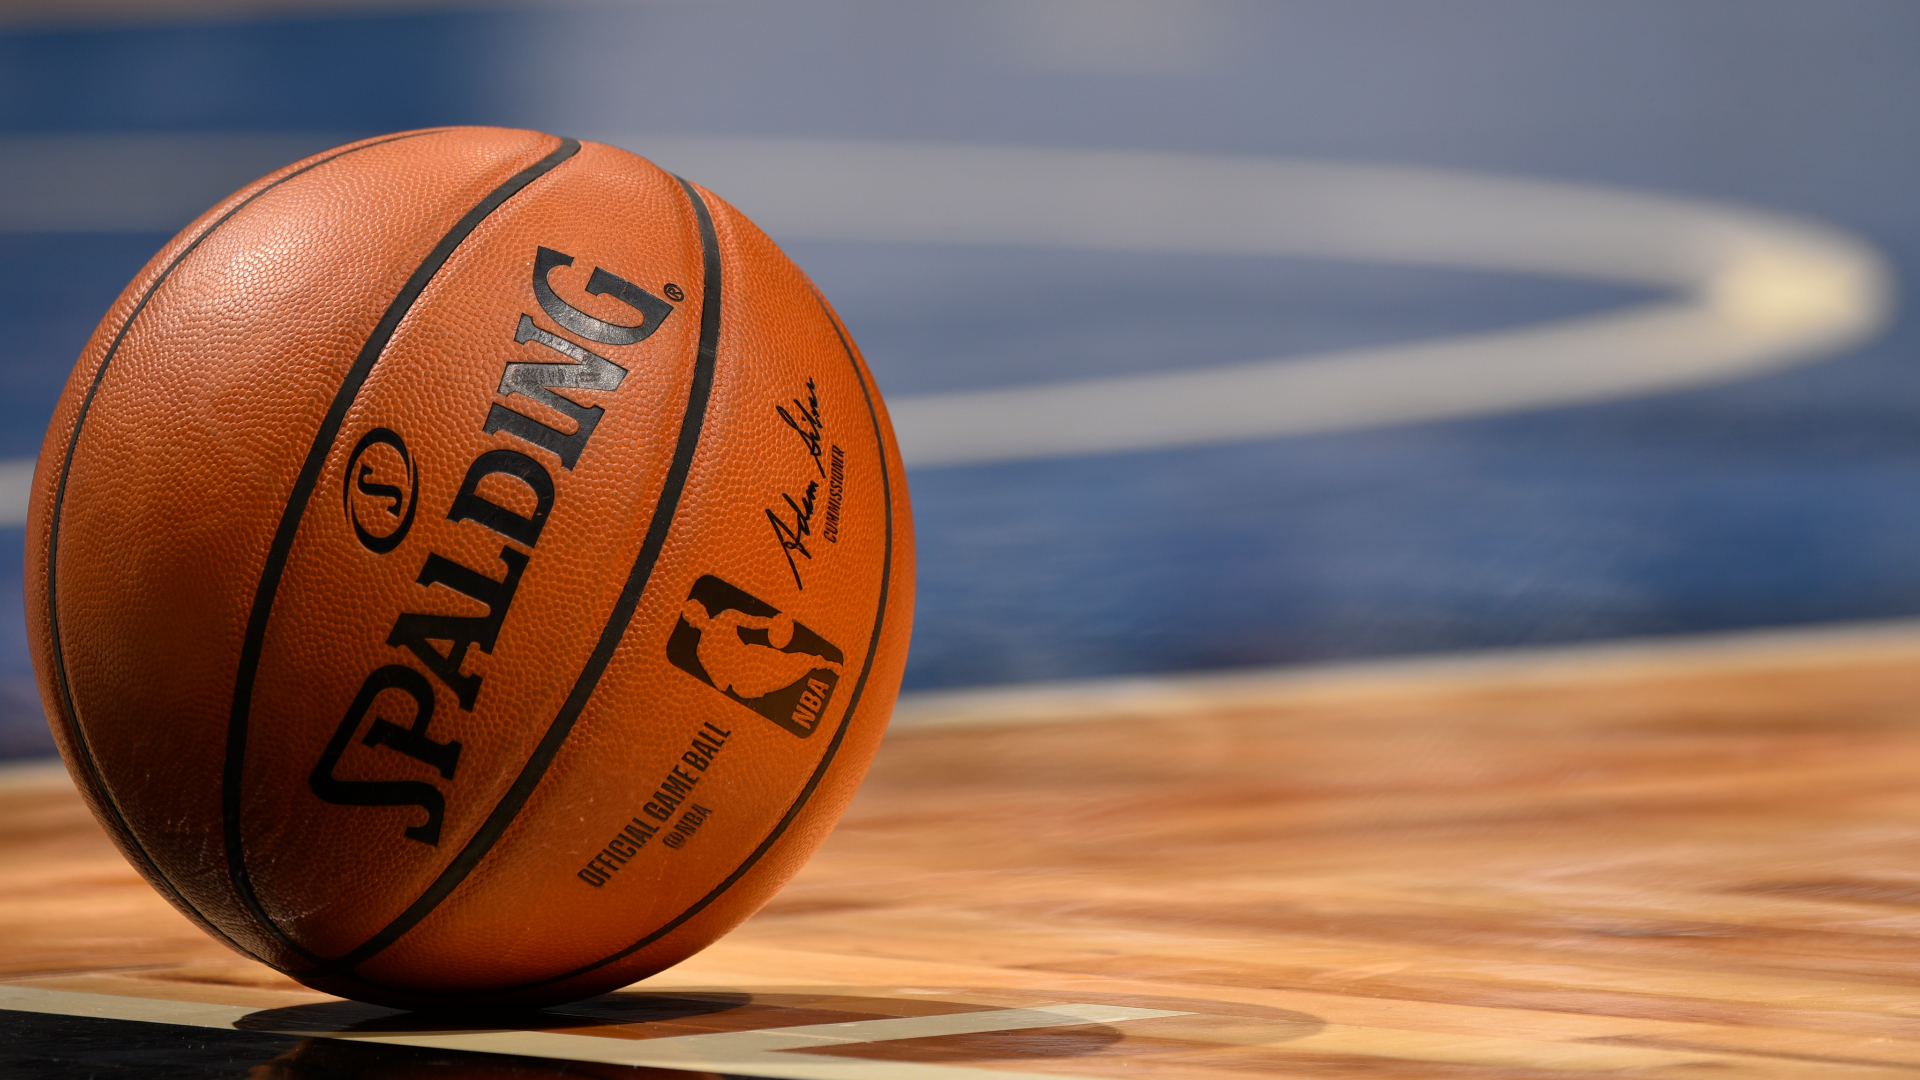 Spalding on Why NBA Partnership Is Ending After Nearly 40 Years